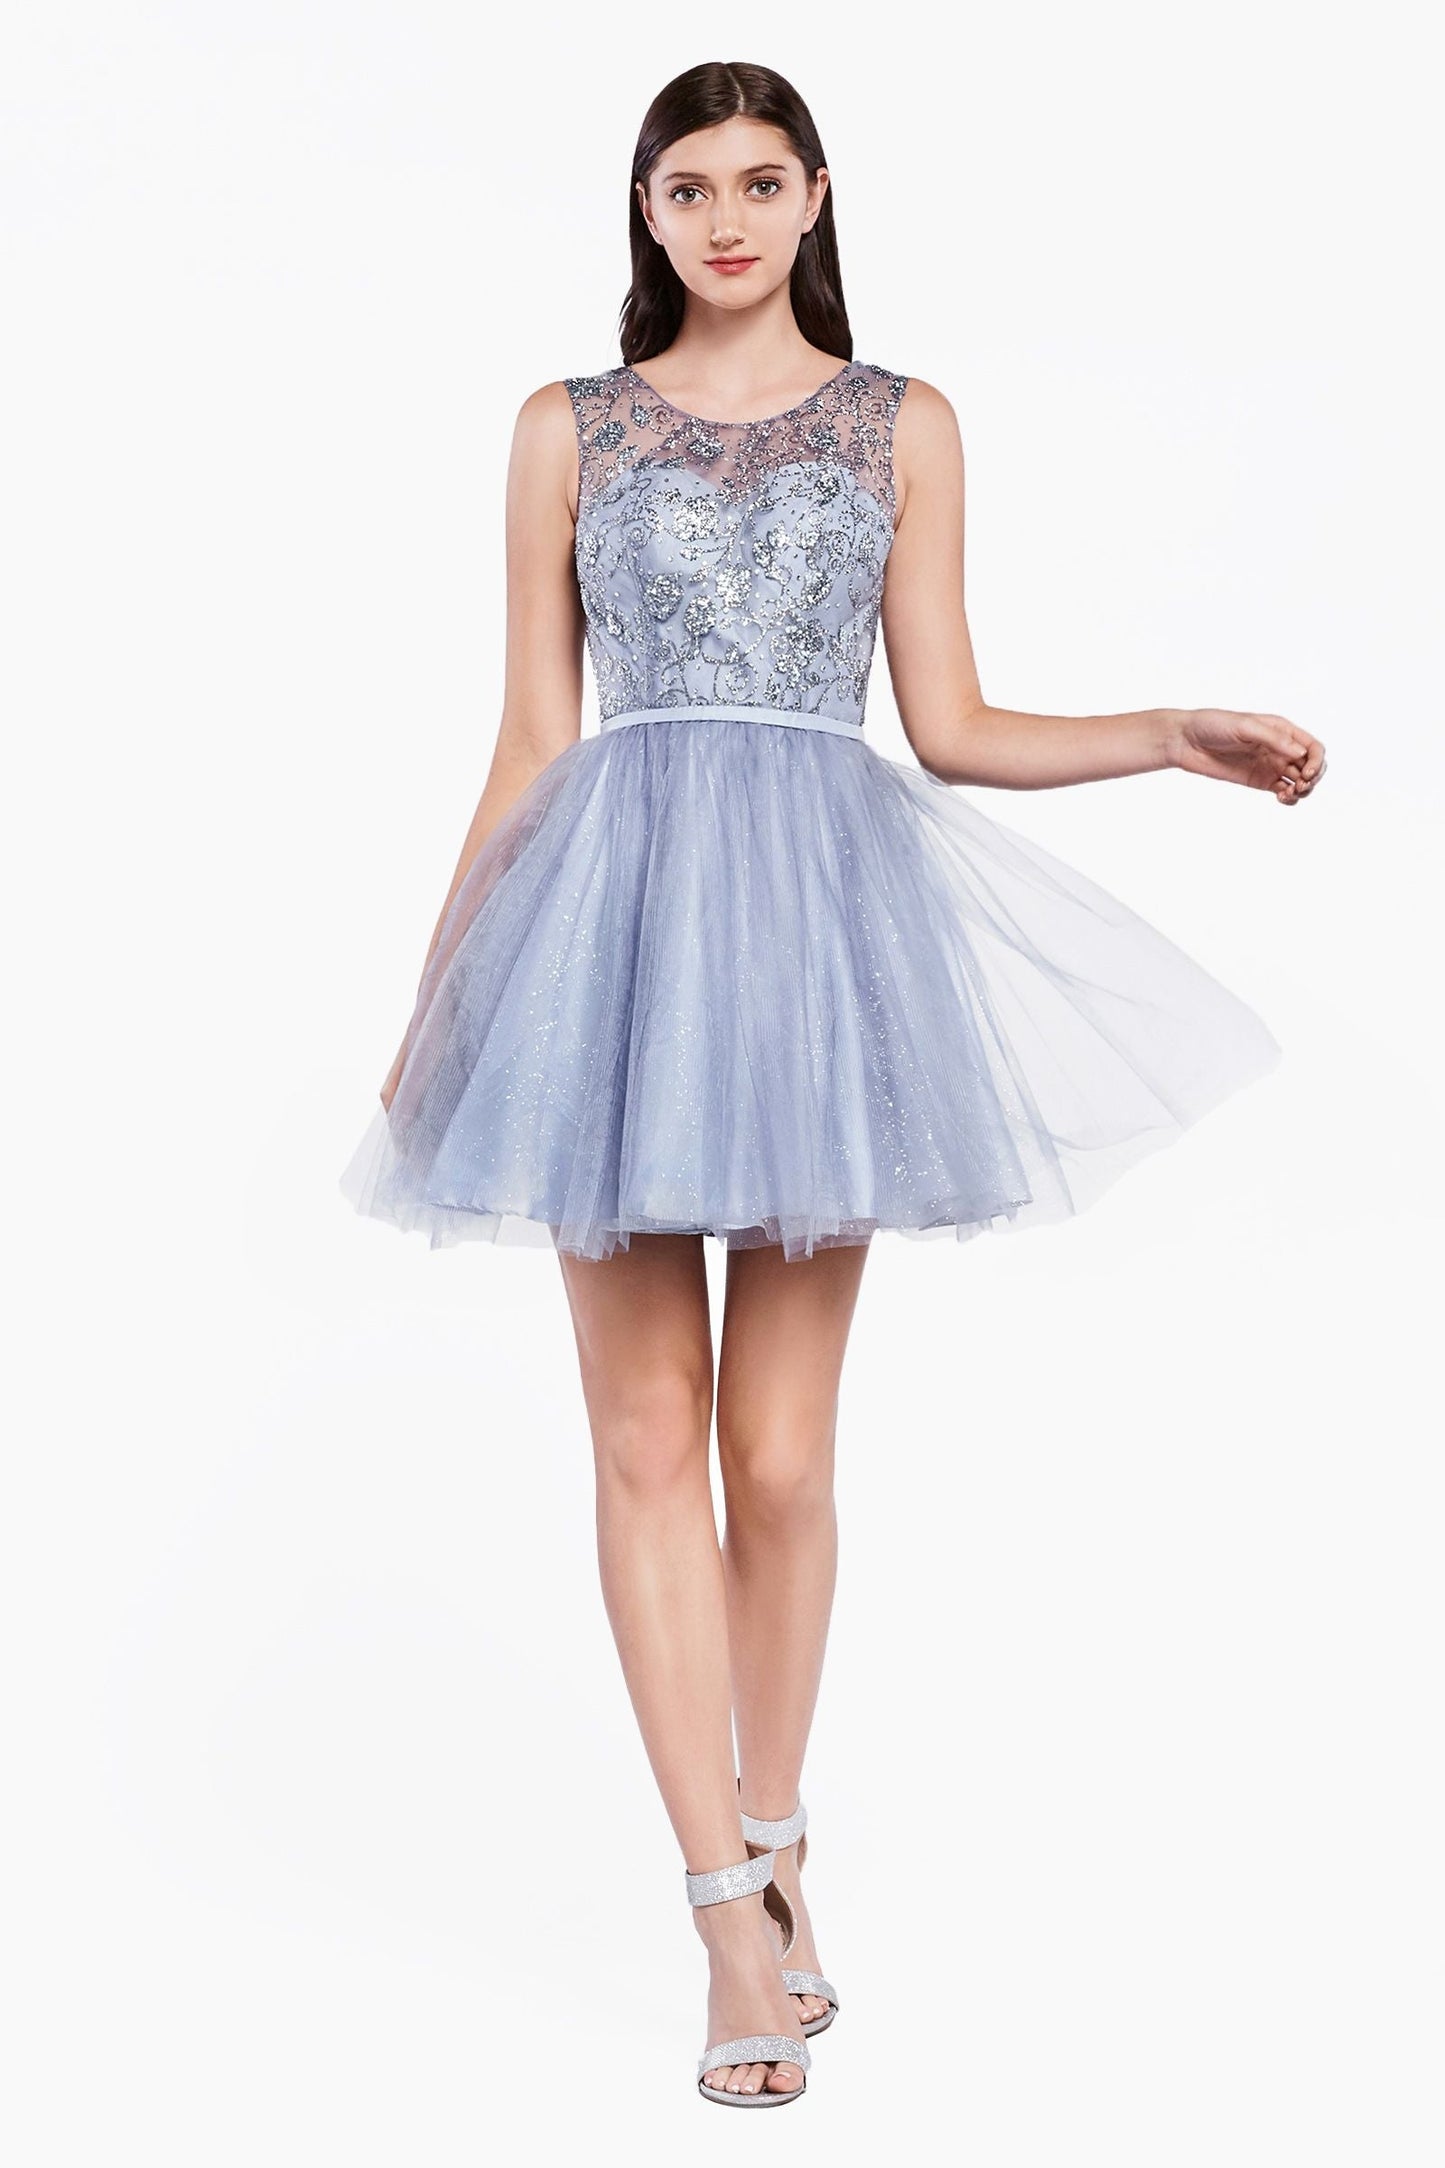 A-Line Tulle Short Dress With Glitter Detail And Illusion Neckline.